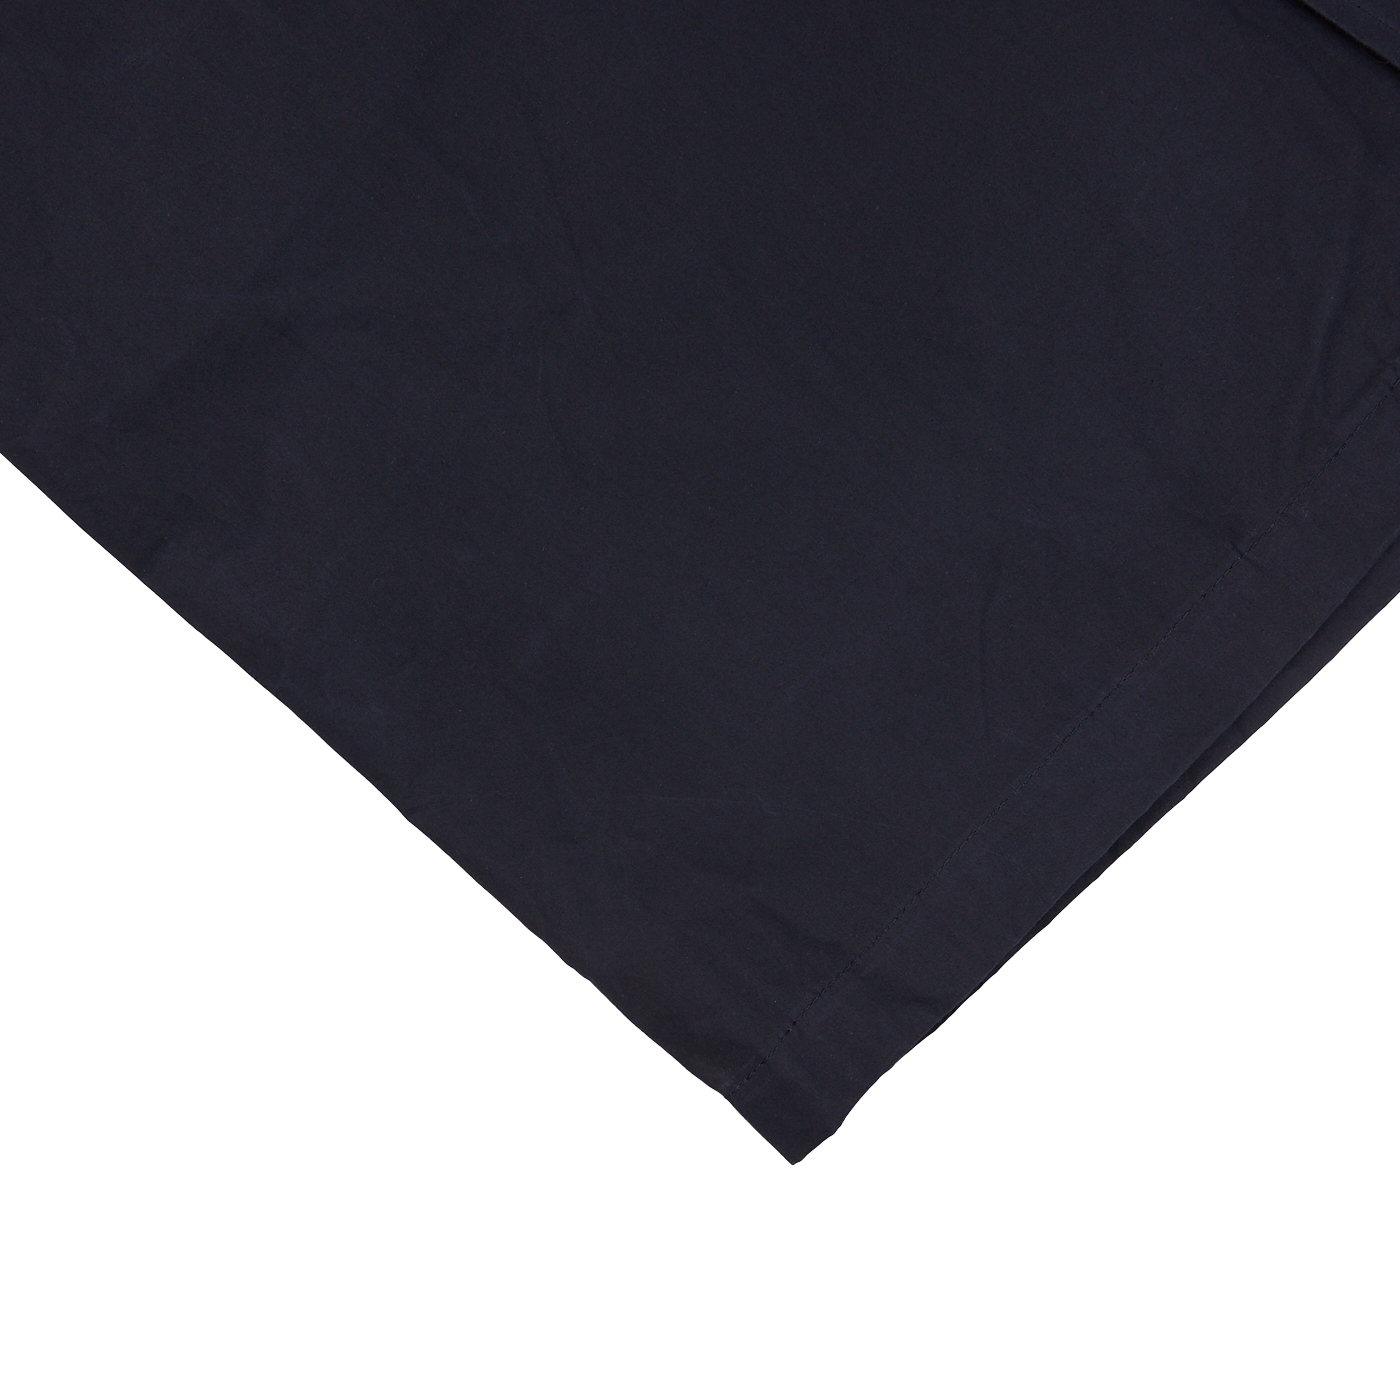 An image of a Navy Blue Waxed Cotton Kamikaze Trenchcoat pocket square by L'Impermeabile on a white surface.